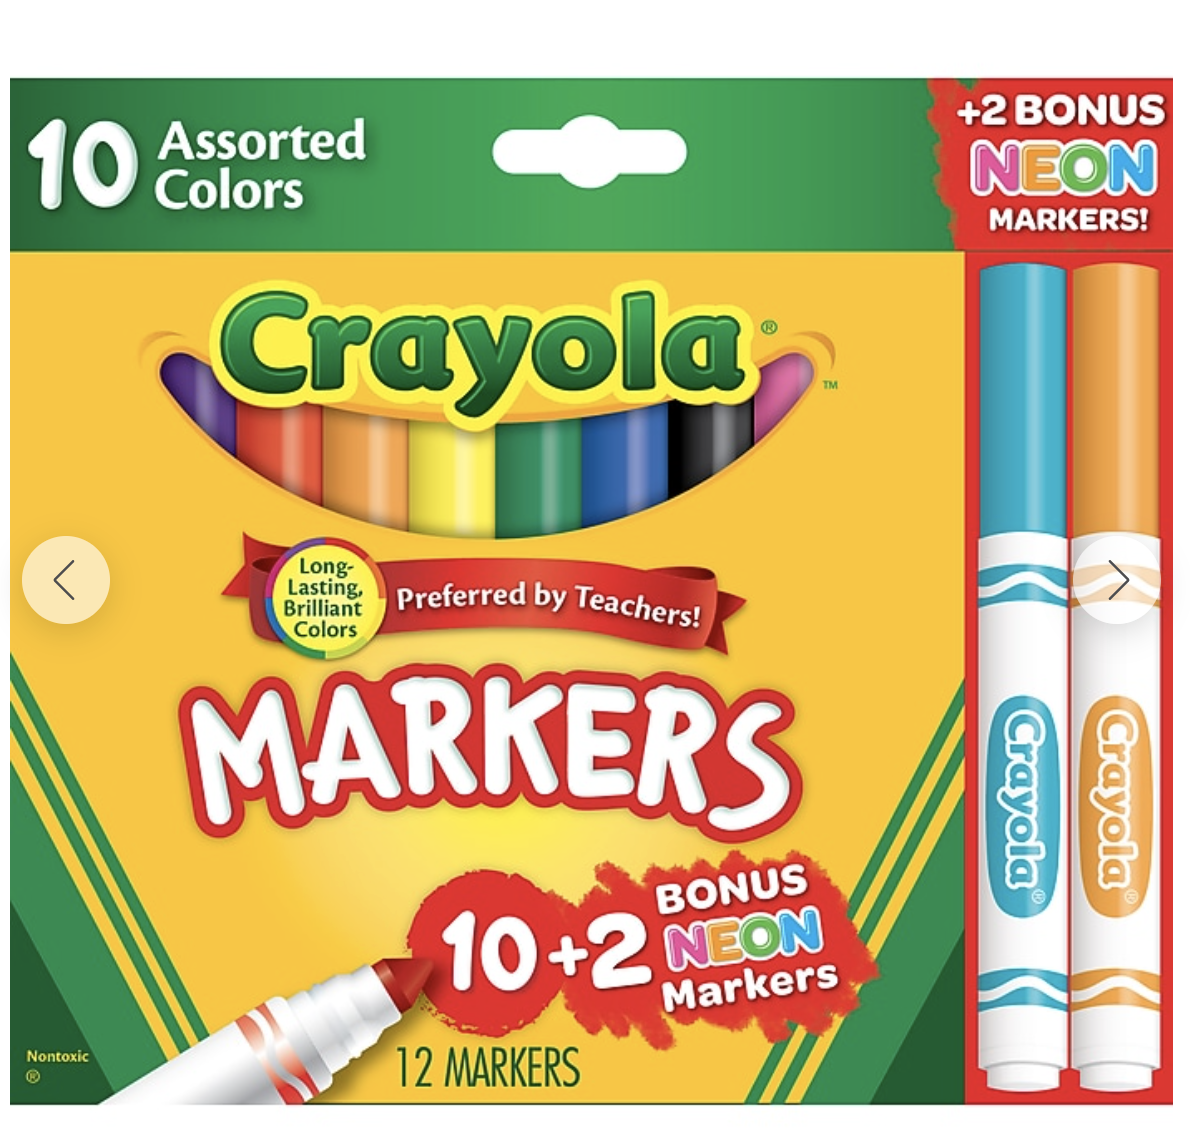 The box of markers